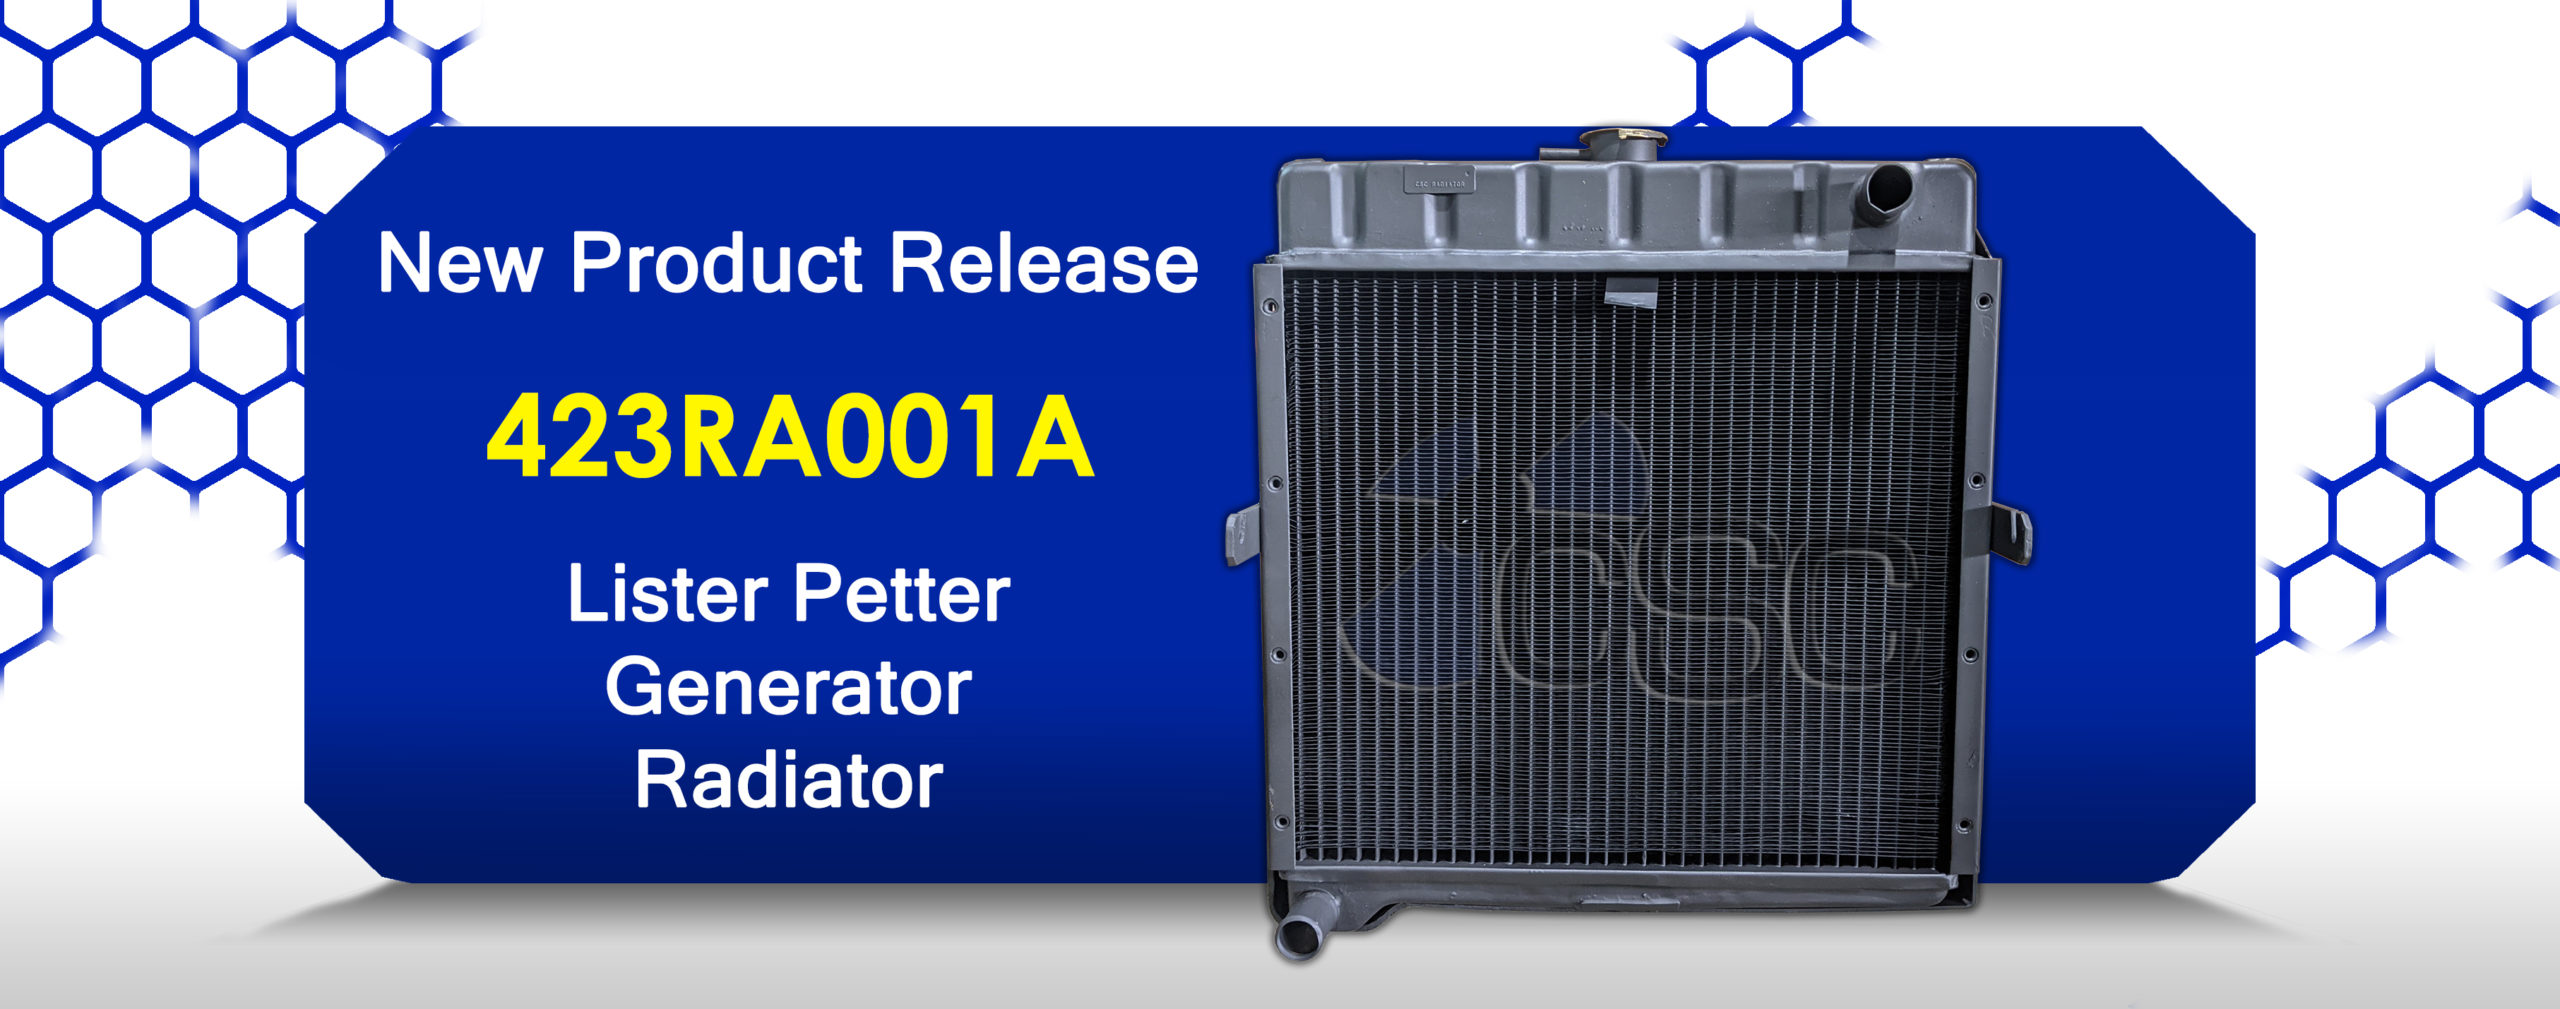 423RA001A for 16kw Lister Petter generator radiator